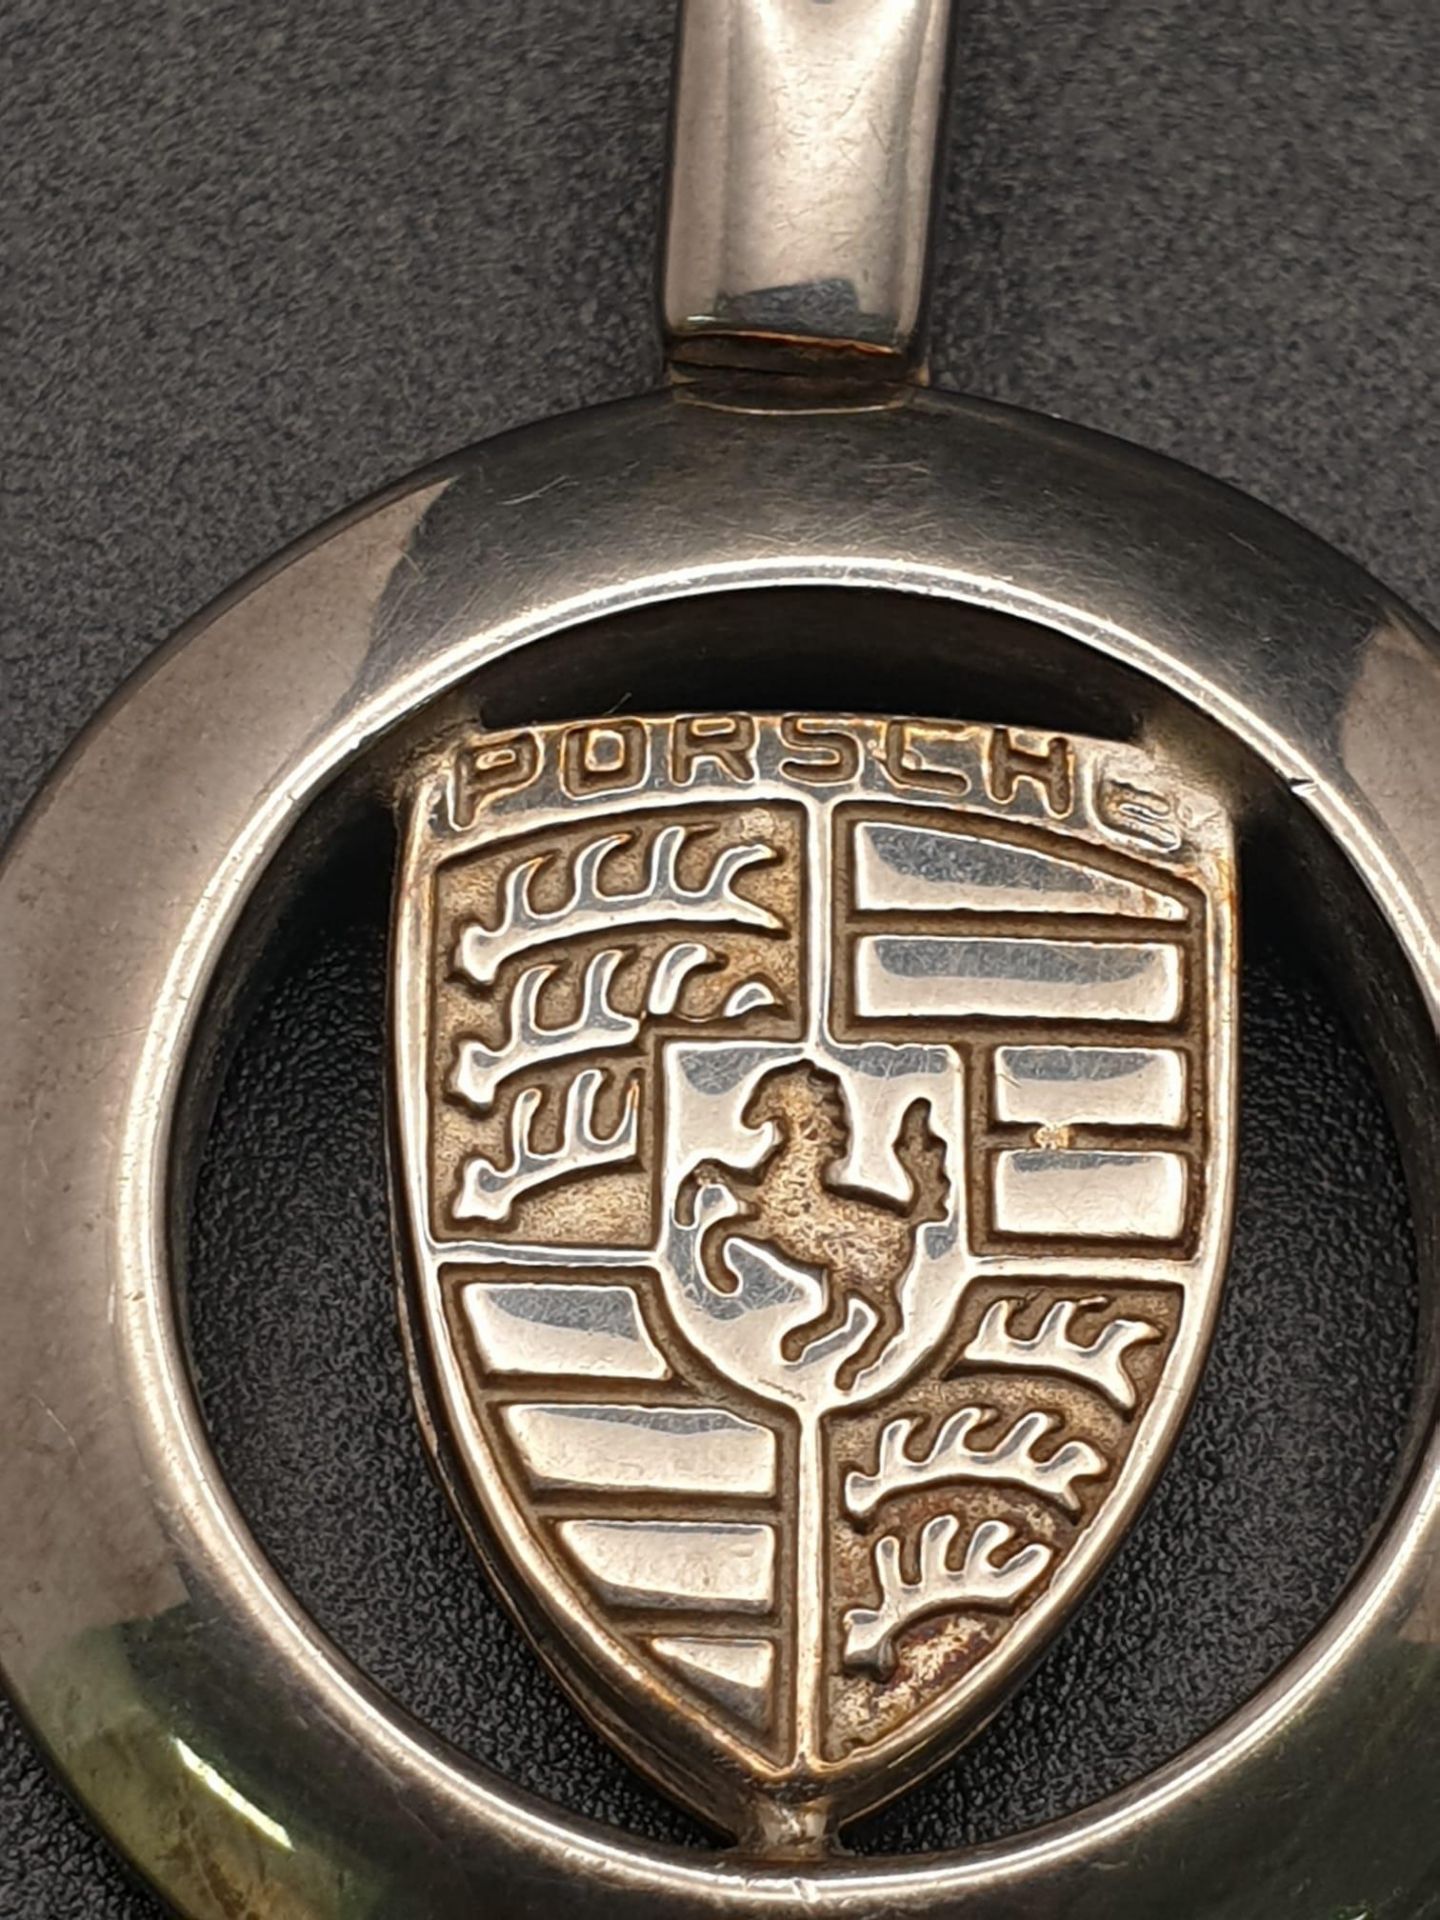 STERLING SILVER PORSCHE PENDANT IDEAL FOR A KEYRING 25.6G - Image 2 of 4